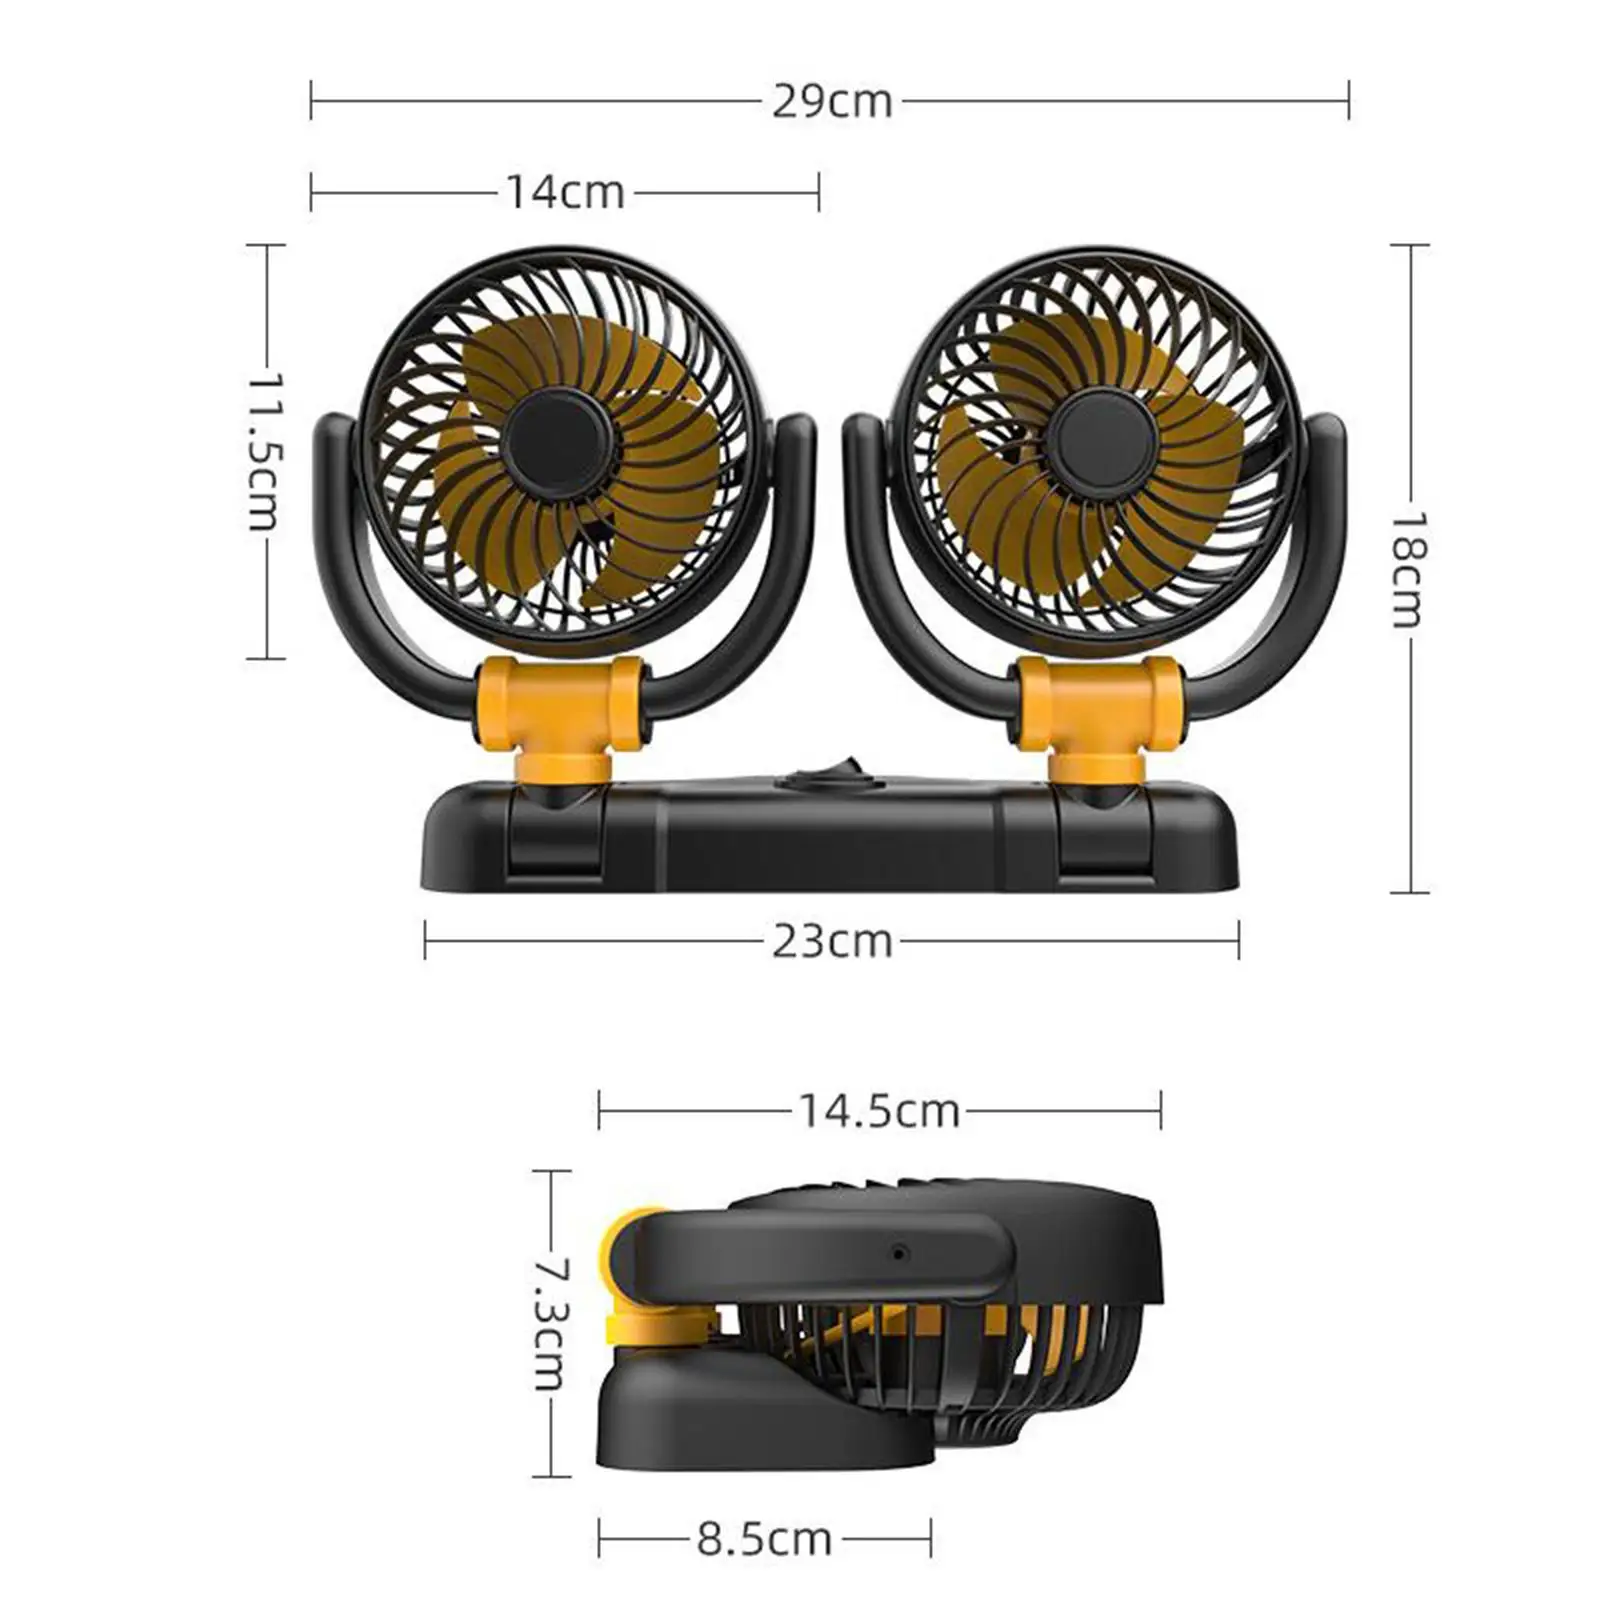 Car Double Head Folding Fan Accessories 360 Degrees Rotary Portable Car Cooling Air Fan for Dashboard SUV Boat RV Home premium